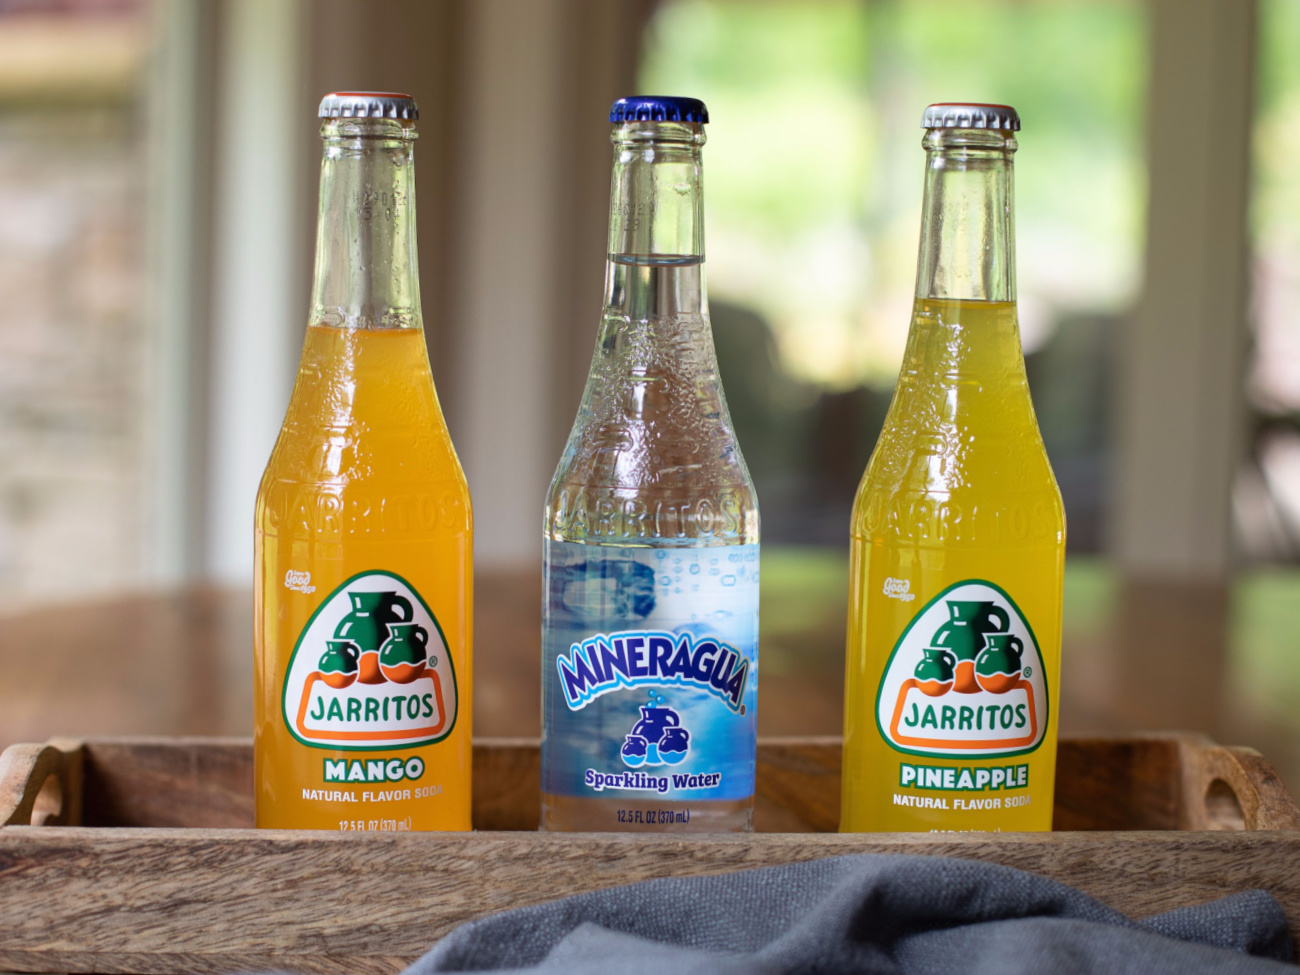 Nice Discount On Mineragua Sparkling Water & Jarritos Soda At Publix